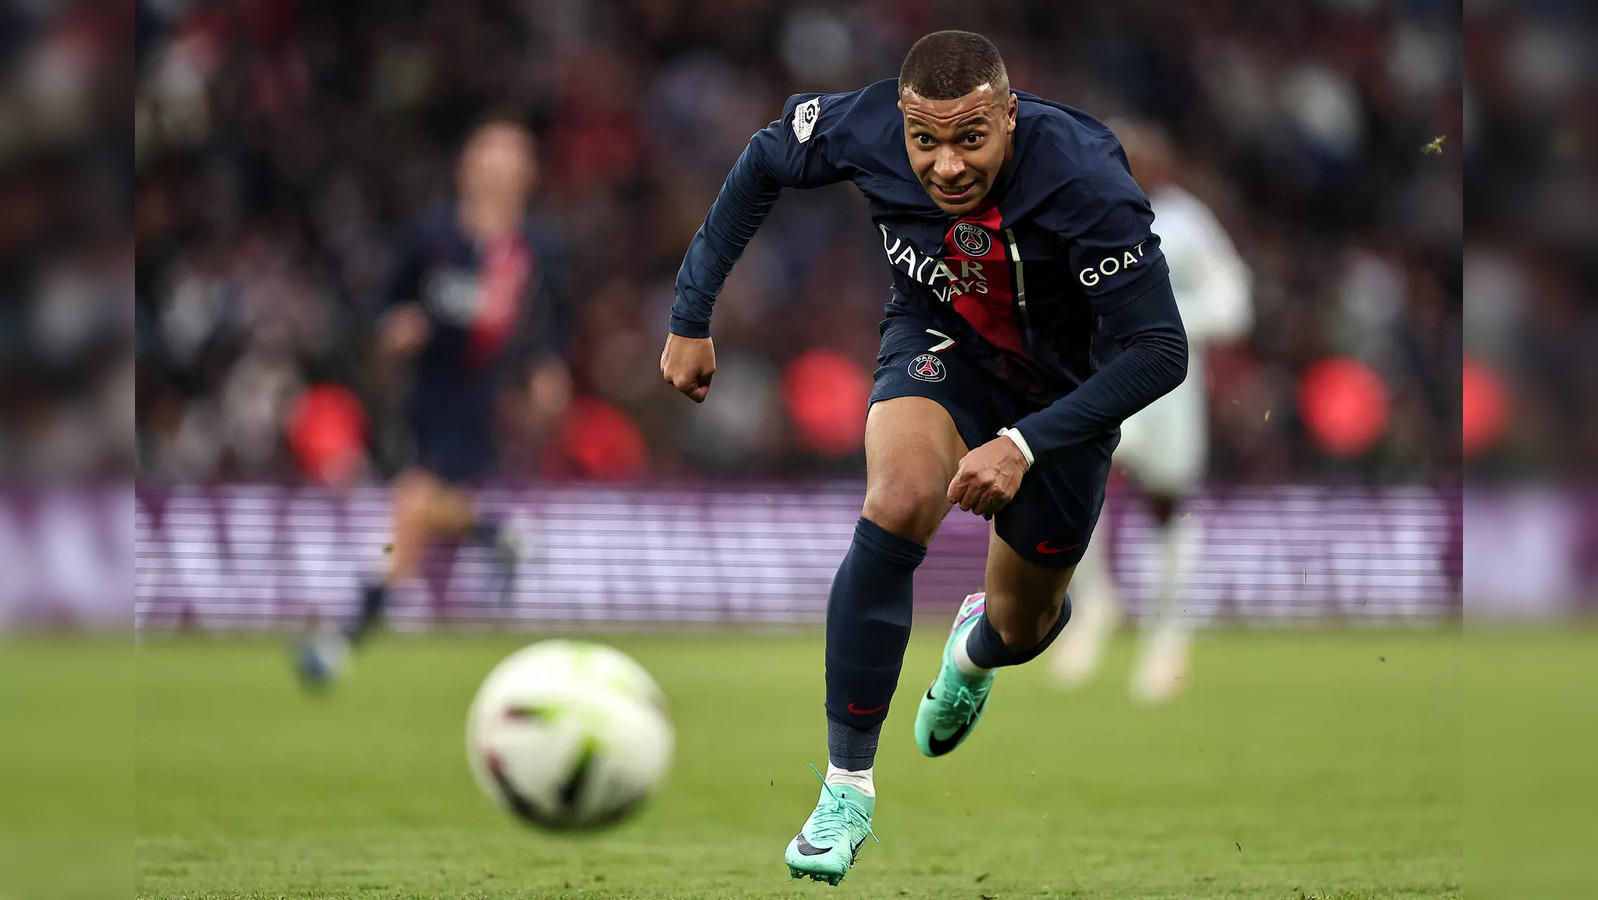 Paris Match Magazine via RMC] Kylian Mbappe: “Human ties are much more  exciting (than money). Life experiences matter more than money, even if it  is important. Above all, I thirst for discoveries